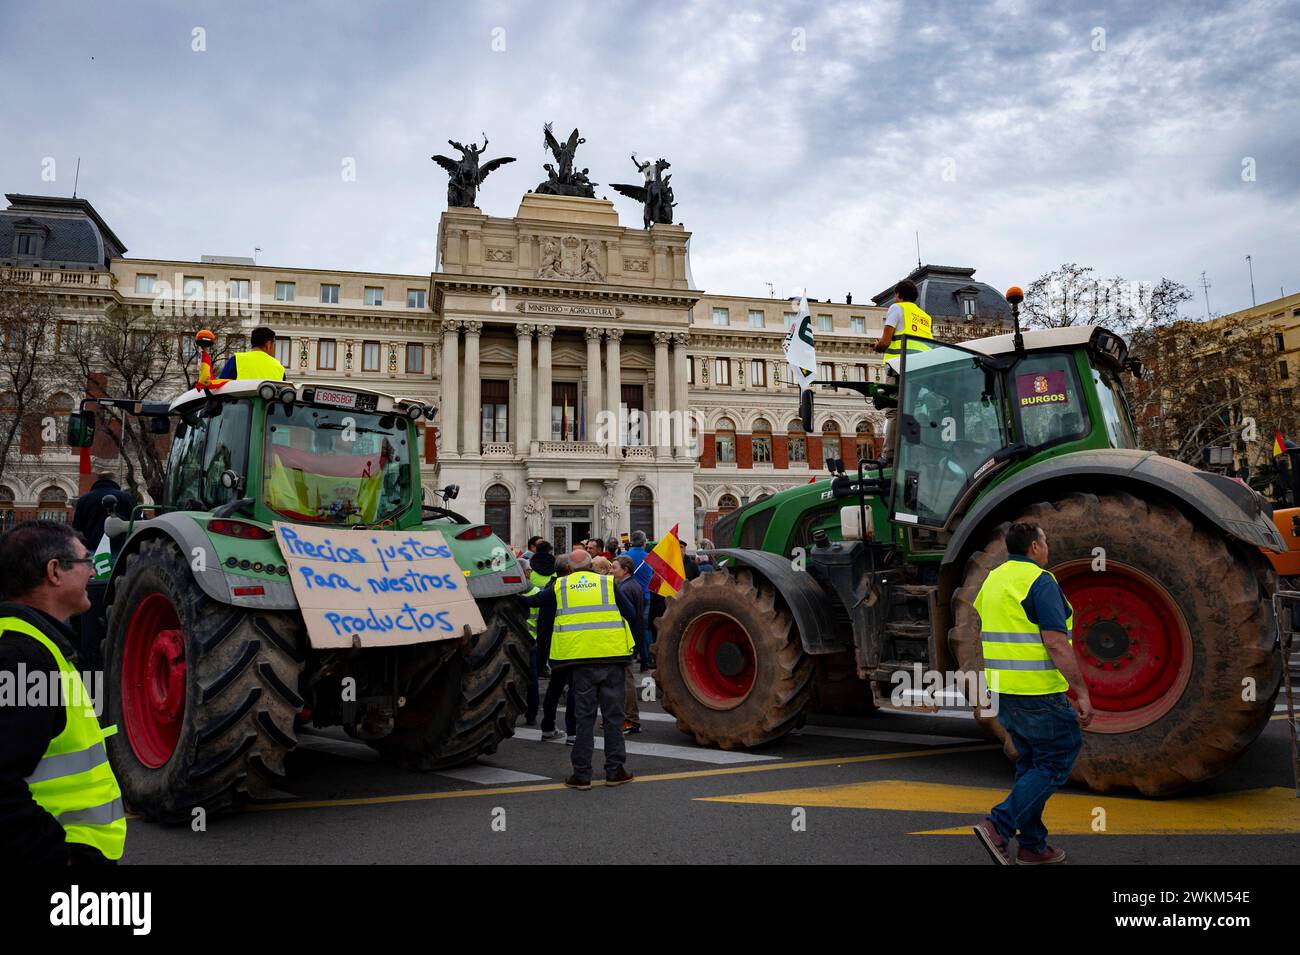 Spanish farmer demonstration in Madrid Some tractors seen parked in front of the Spanish Ministry of Agriculture during the farmers demonstration in Madrid the protest, organized by Spanish trade unions, is focused on concerns over unfair competition from products originating outside the EU. Farmers are also unhappy about the meager profits derived from their crops and are critical of EU agricultural policy. Madrid Puerta de Alcala Madrid Spain Copyright: xAlbertoxGardinx AGardin 20240221 manifestacion tractores madrid 190 Stock Photo